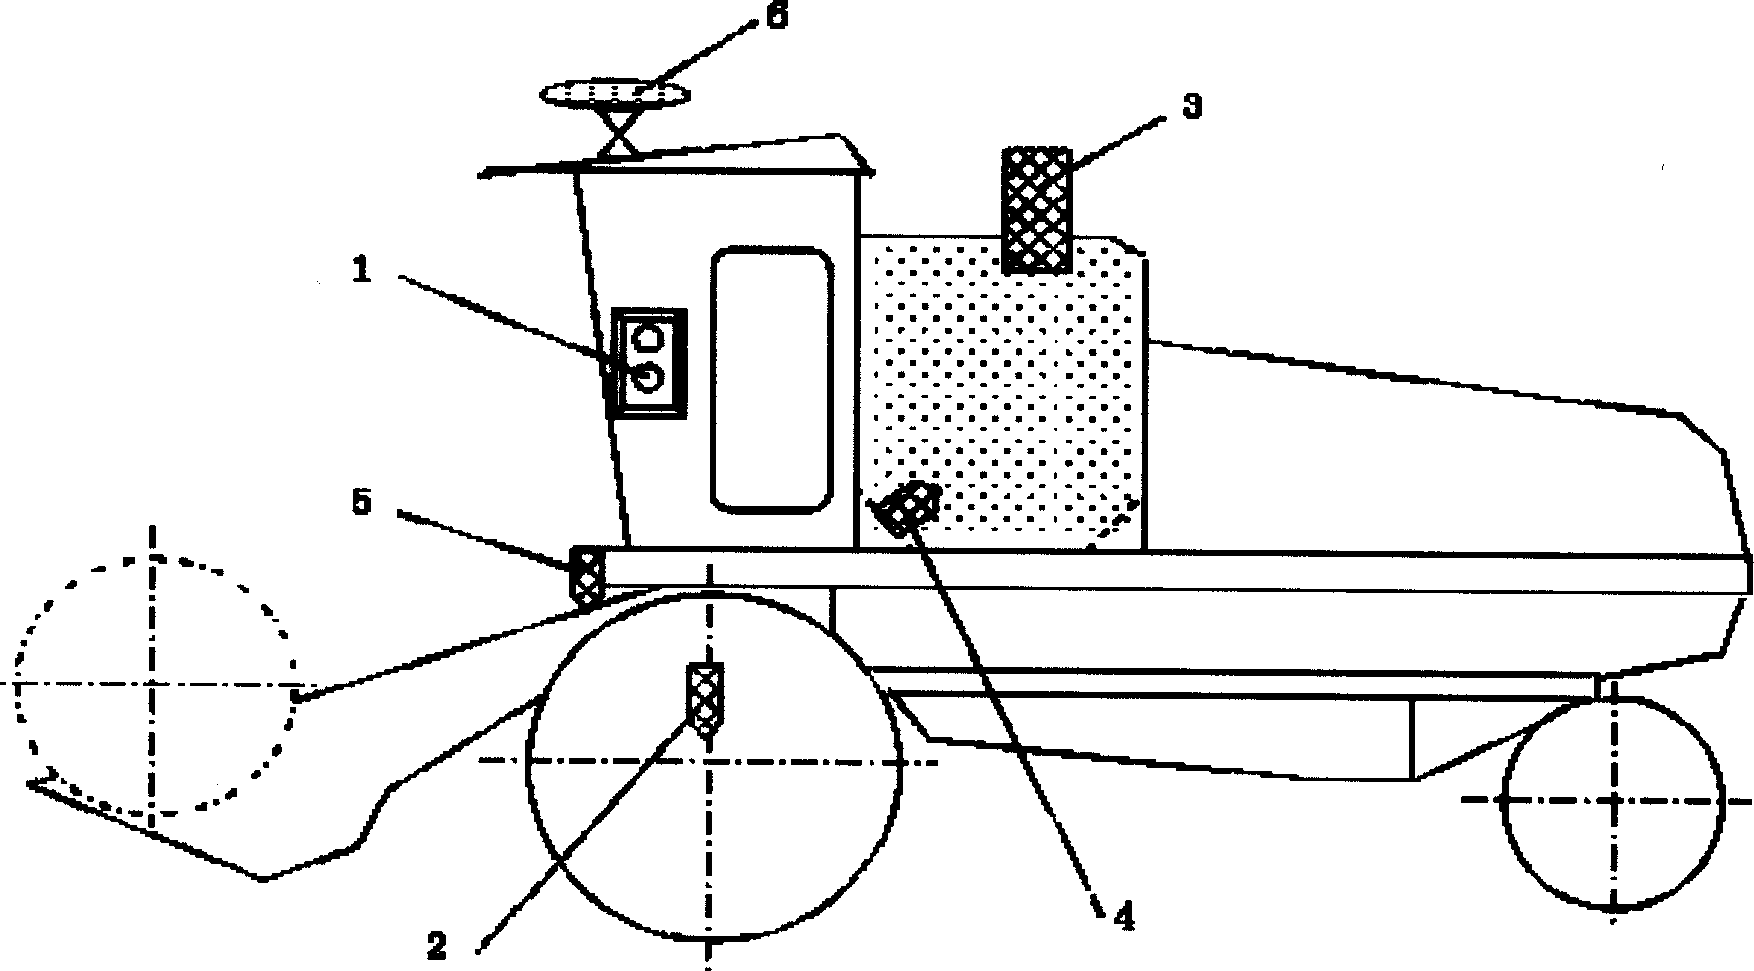 System for measuring yield of stored grain based on single chip nicrocemputer and electric tray